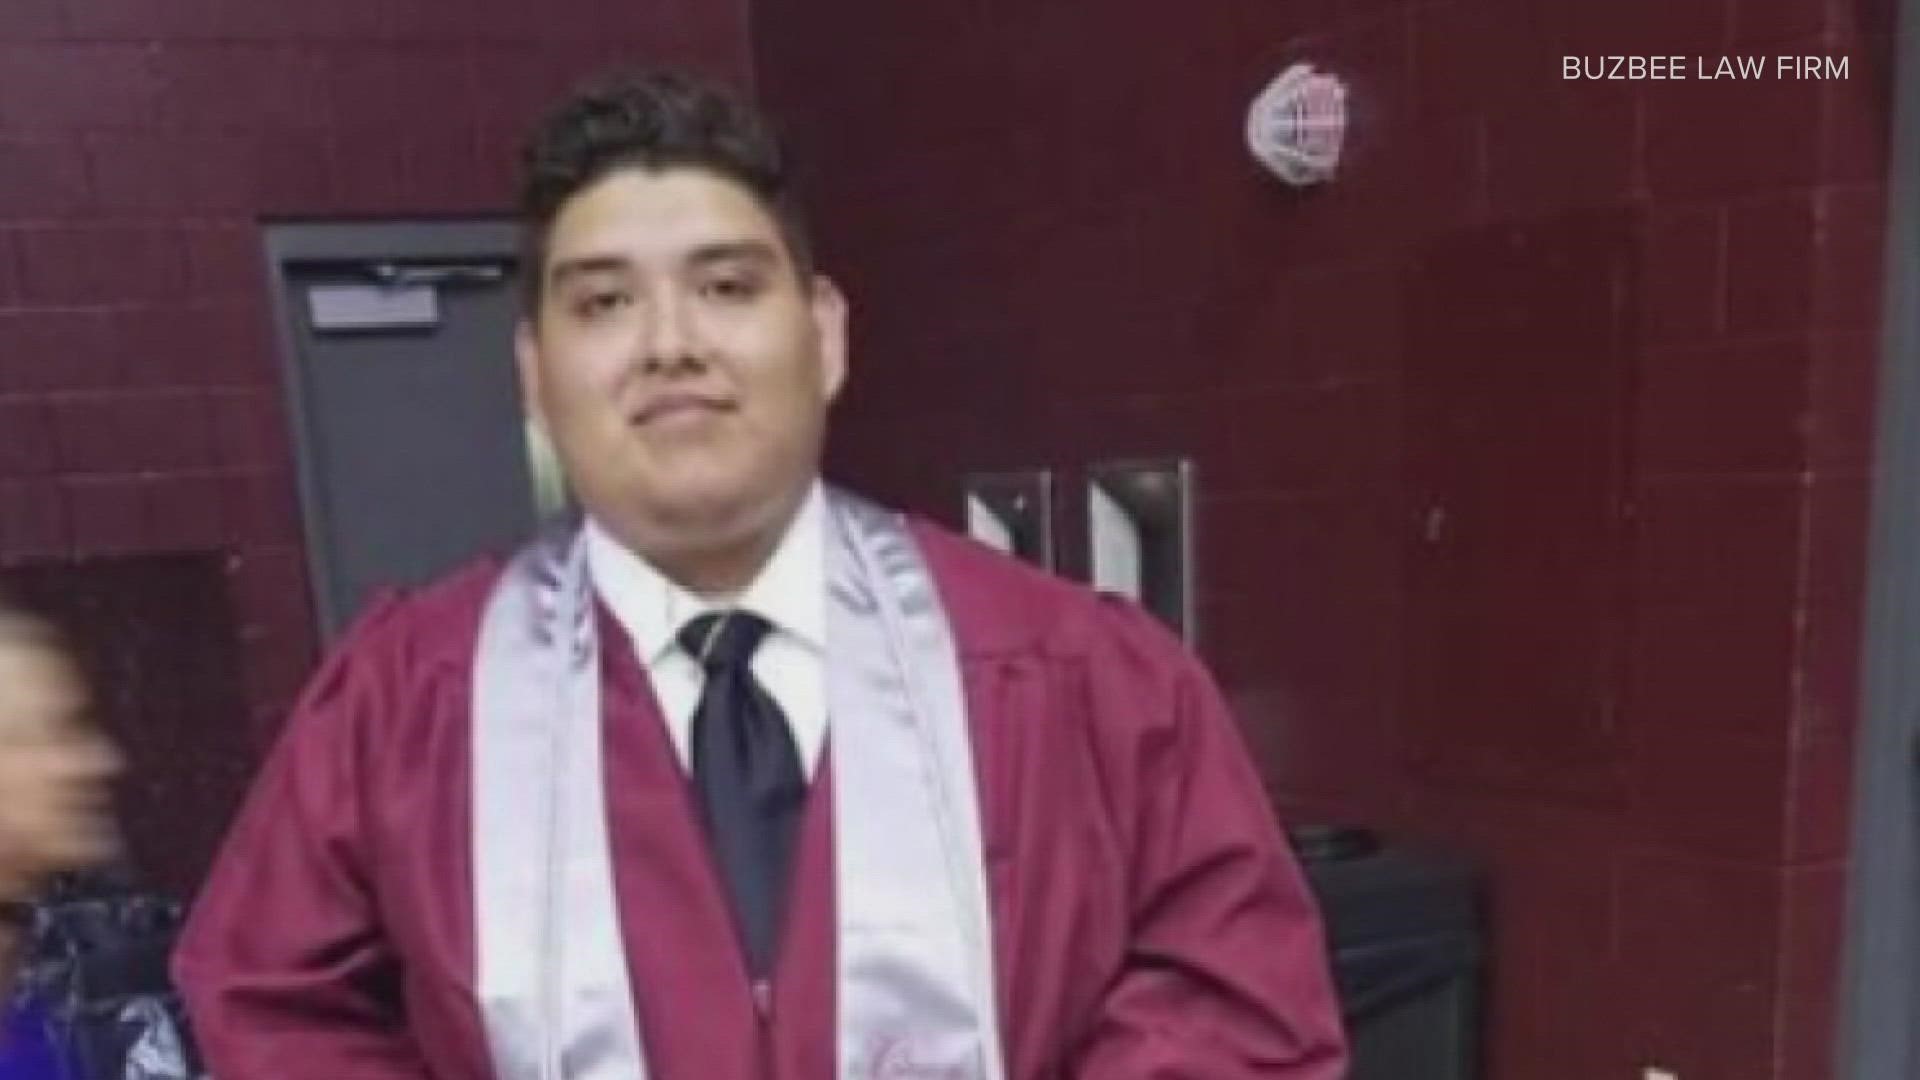 Axel Acosta from Tieton, Washington died during a mass casualty event on Nov. 5.